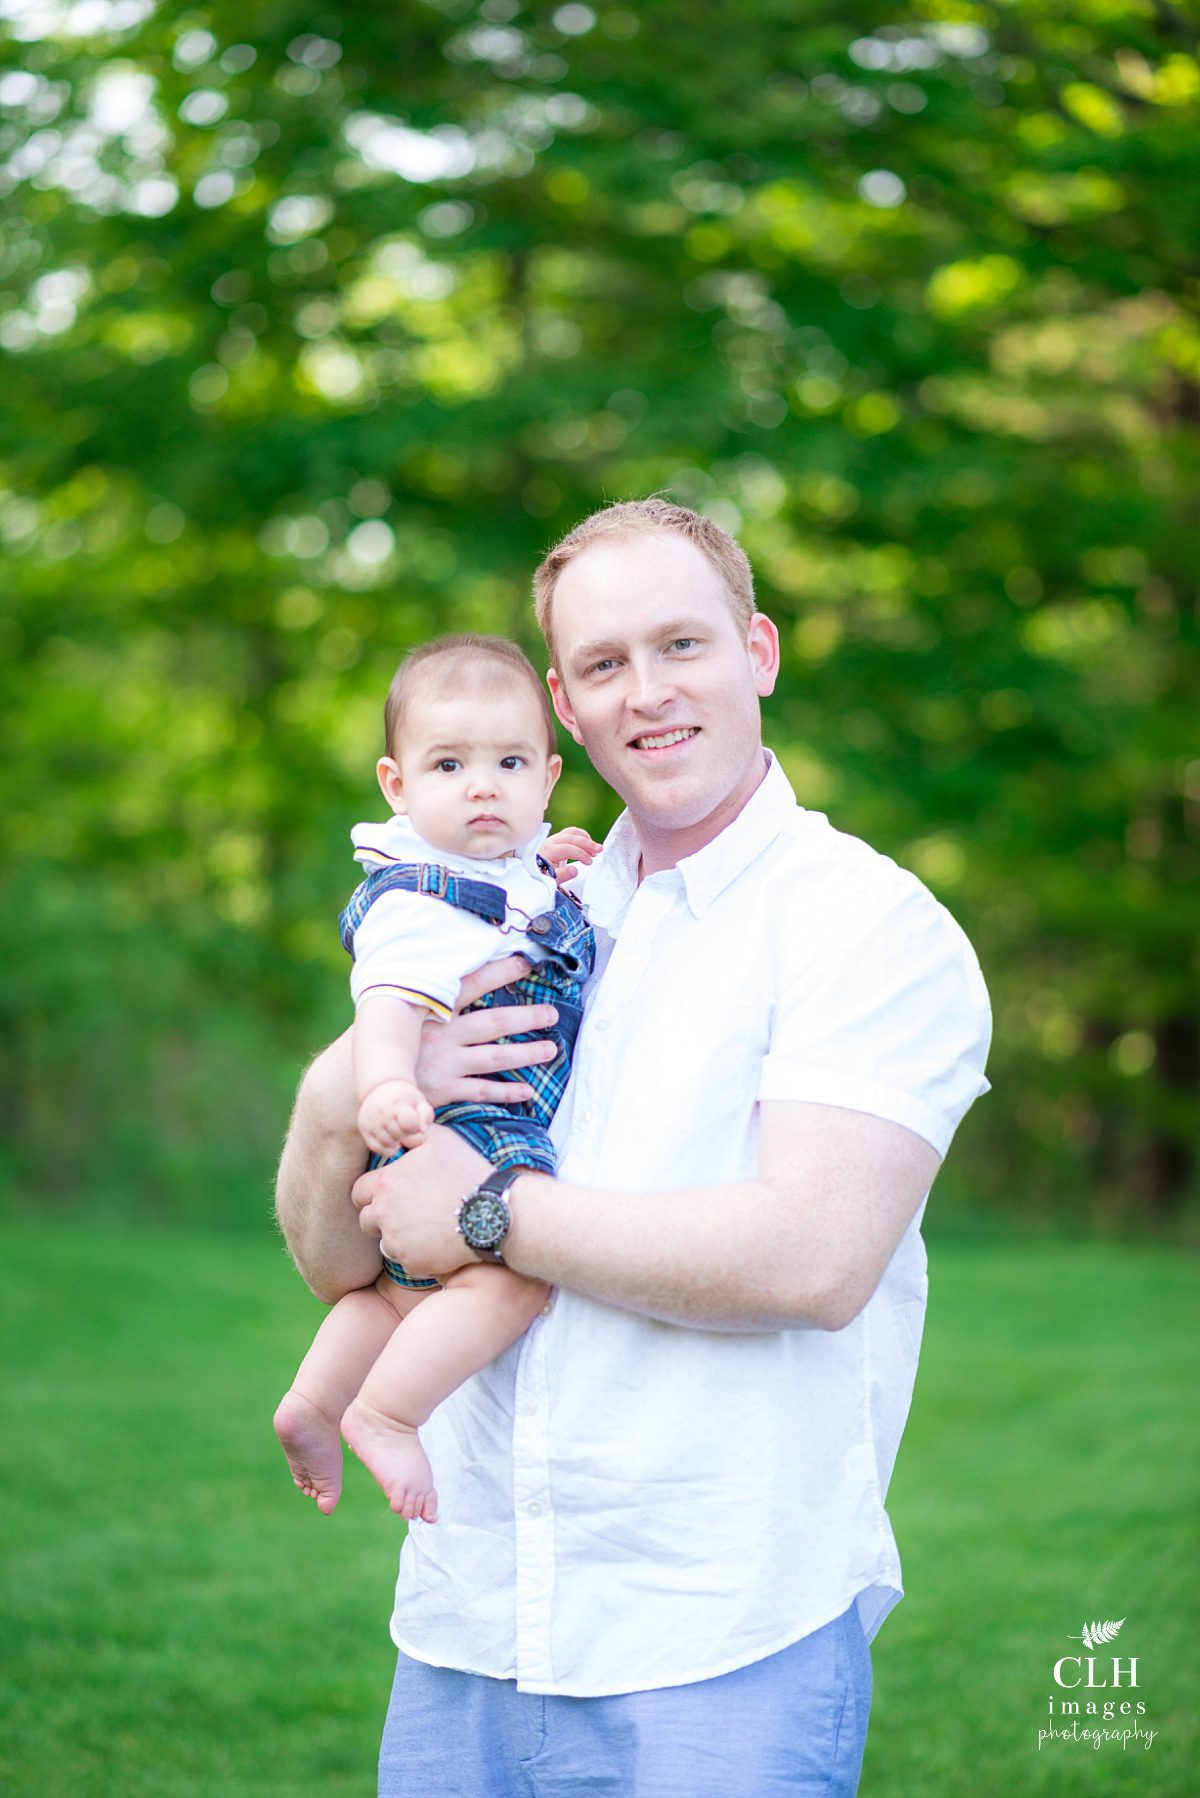 CLH images Photography - Family Photography - Family Photos - Pine Hollow Arboretum - Delmar New York - The Dufores (6)